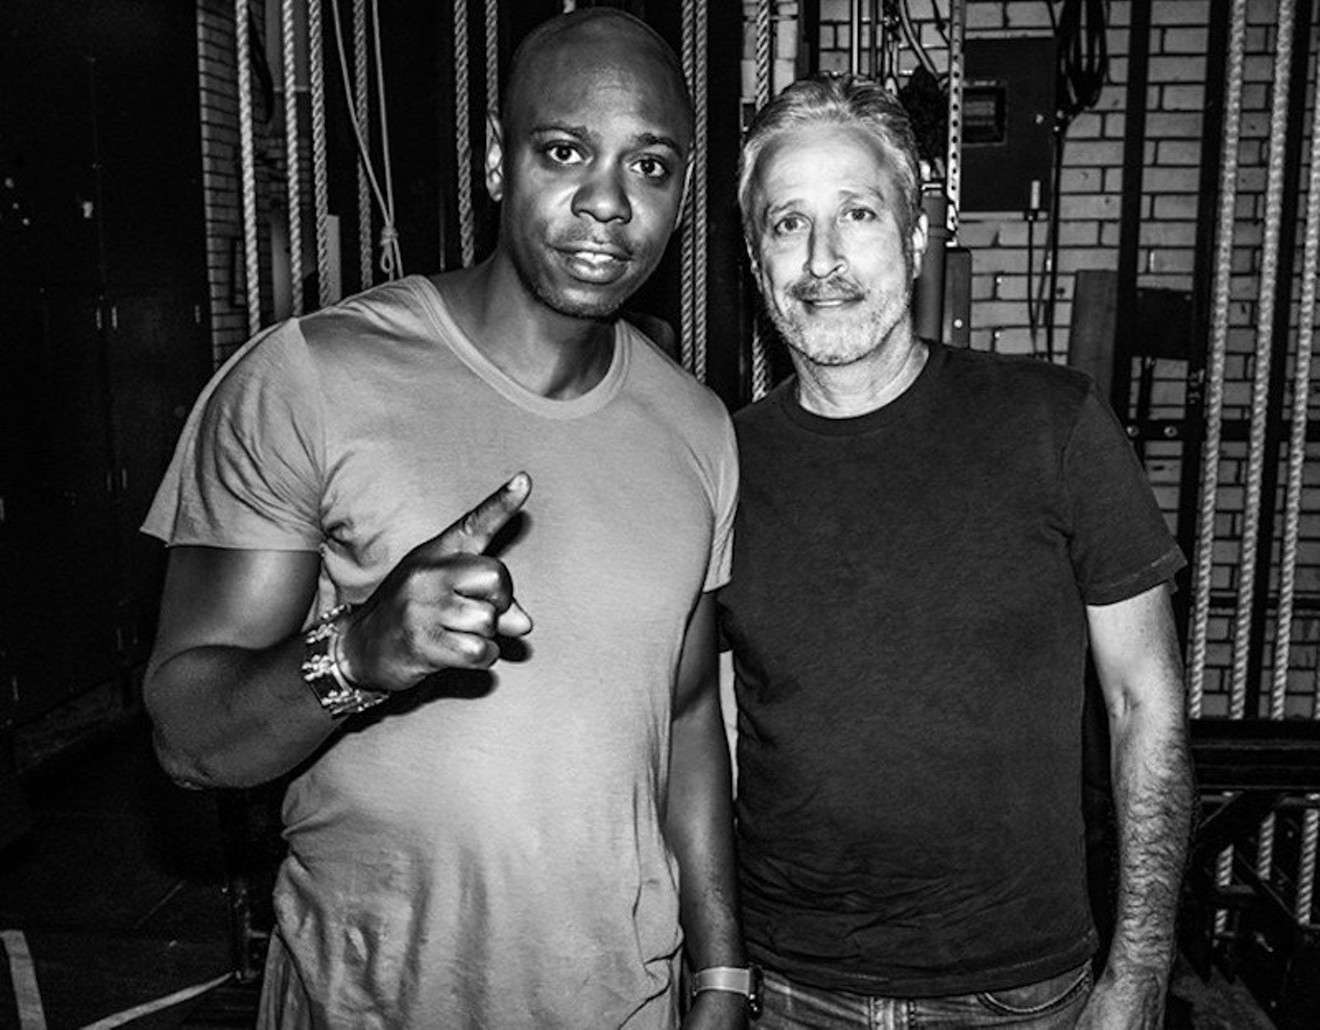 Dave Chappelle and Jon Stewart just added a second show to their jaunt through Colorado on Thursday, August 8. Tickets go on sale today at 10 a.m.